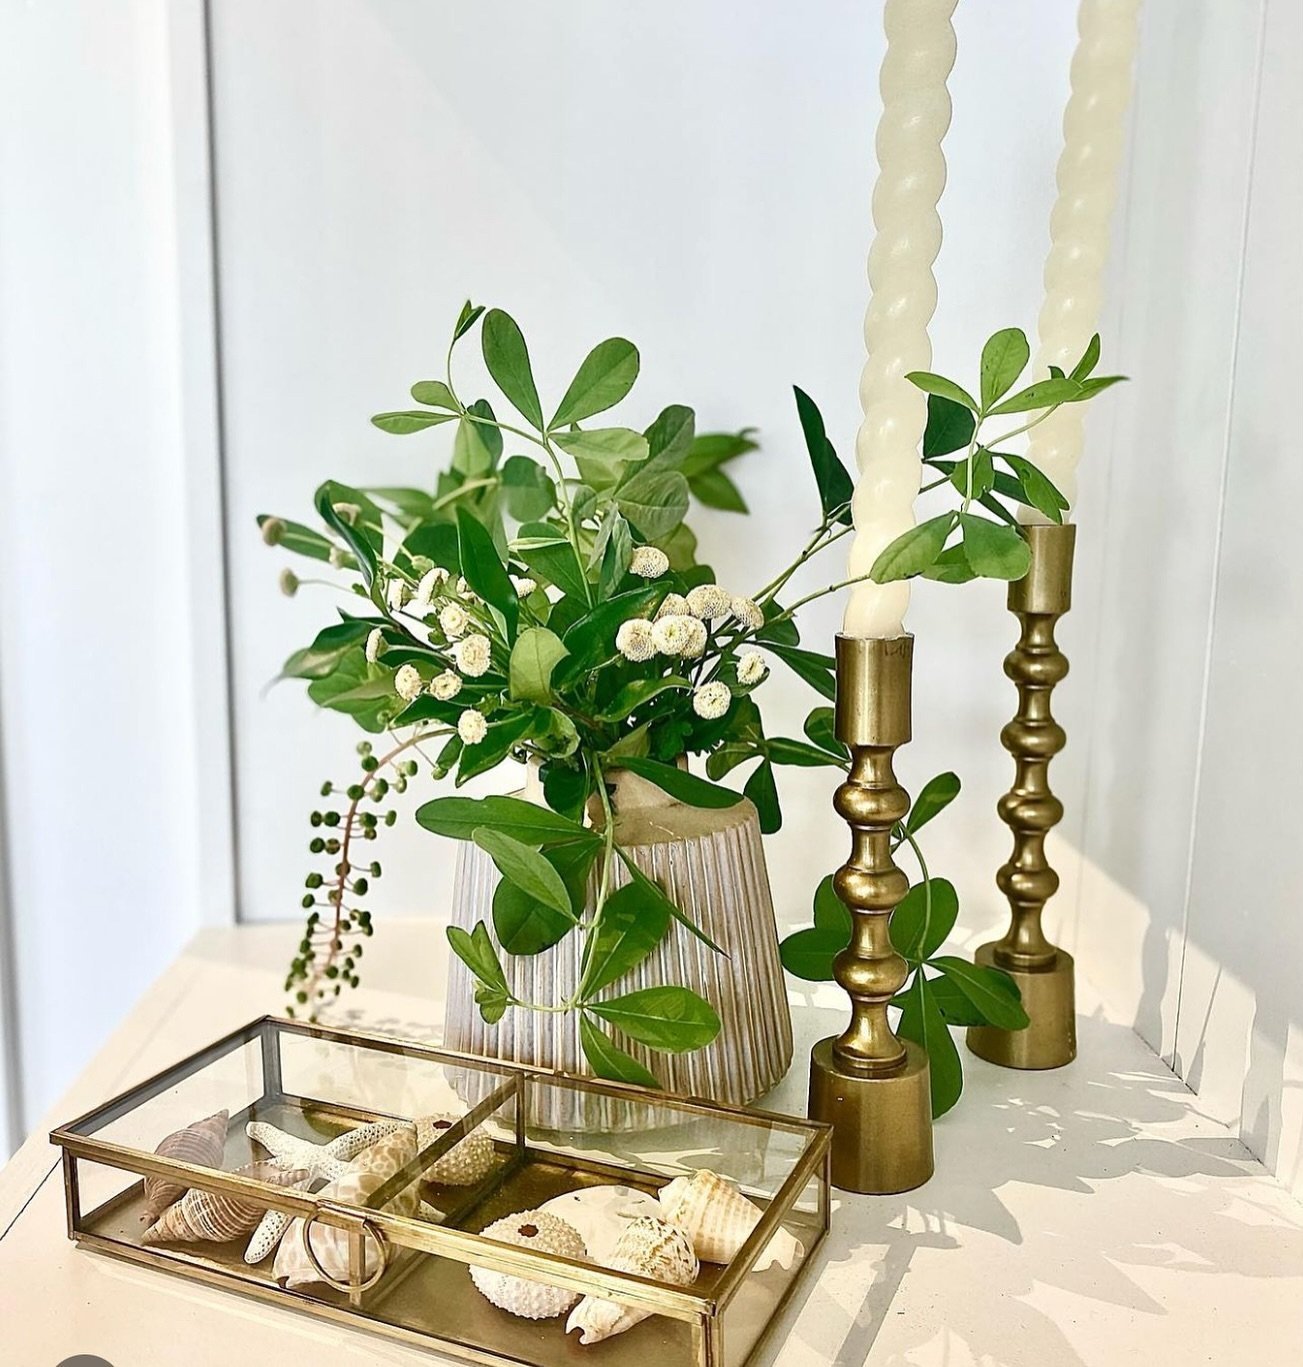 Find the perfect gift for MOM
Mother&rsquo;s Day special 10% off all Candles, Scents, and Candle Holders. 

.
.
#CoastalDecor #CoastalLiving  #MonmouthBeachNJ #MothersDayGifts #MonmouthCountyDesigner #Smmakelifebeautiful #l#MyCovetedHome  #ShowEmYour